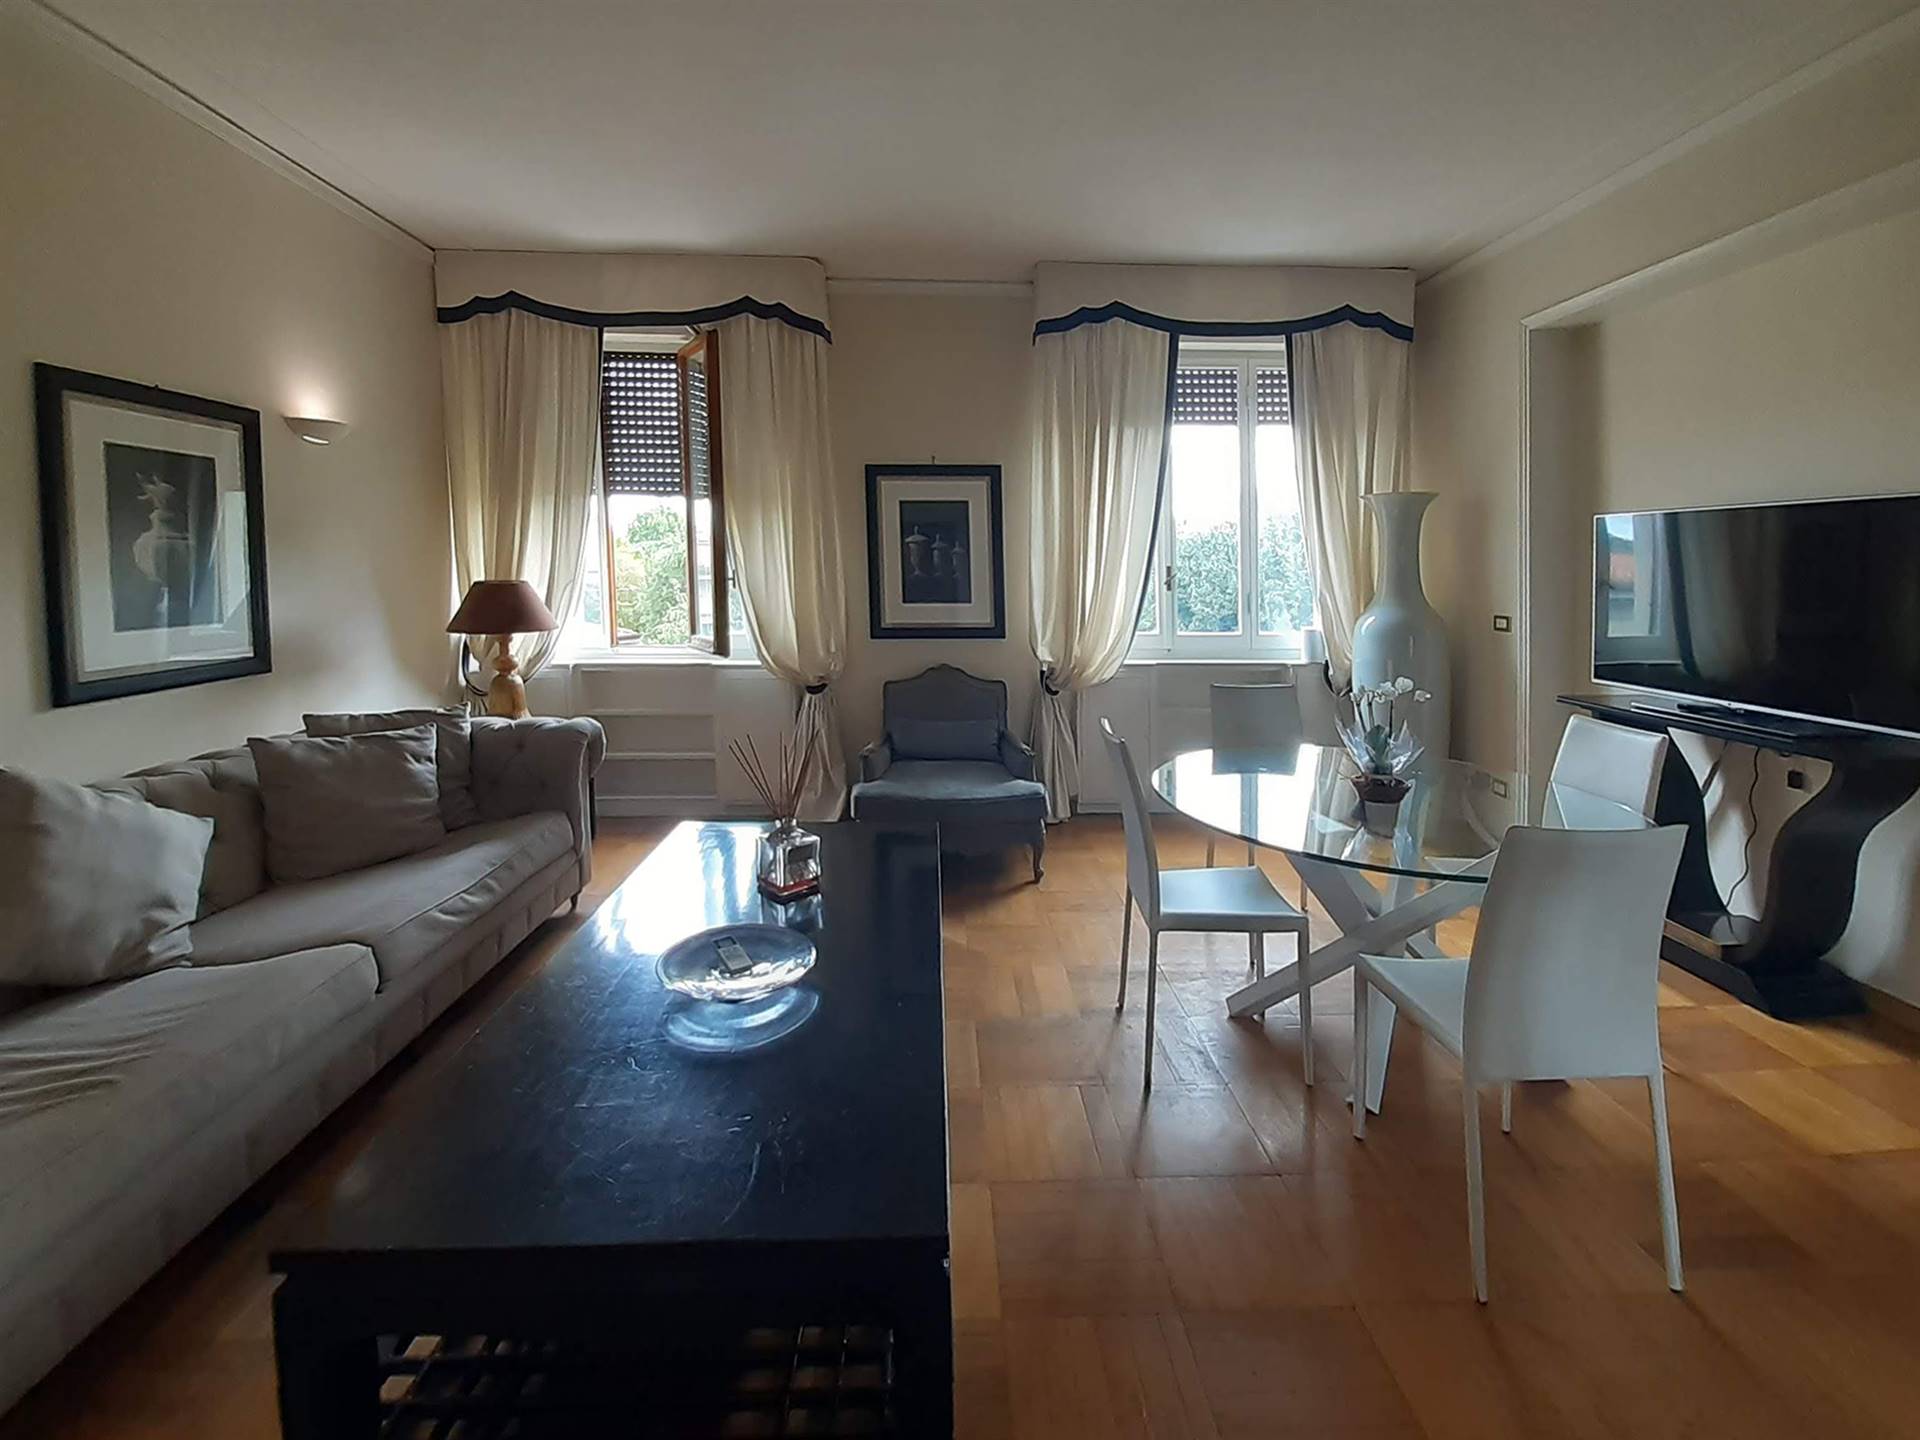 PIAZZA D'AZEGLIO, FIRENZE, Apartment for rent of 160 Sq. mt., Good condition, Heating Individual heating system, Energetic class: G, Epi: 227 kwh/m2 